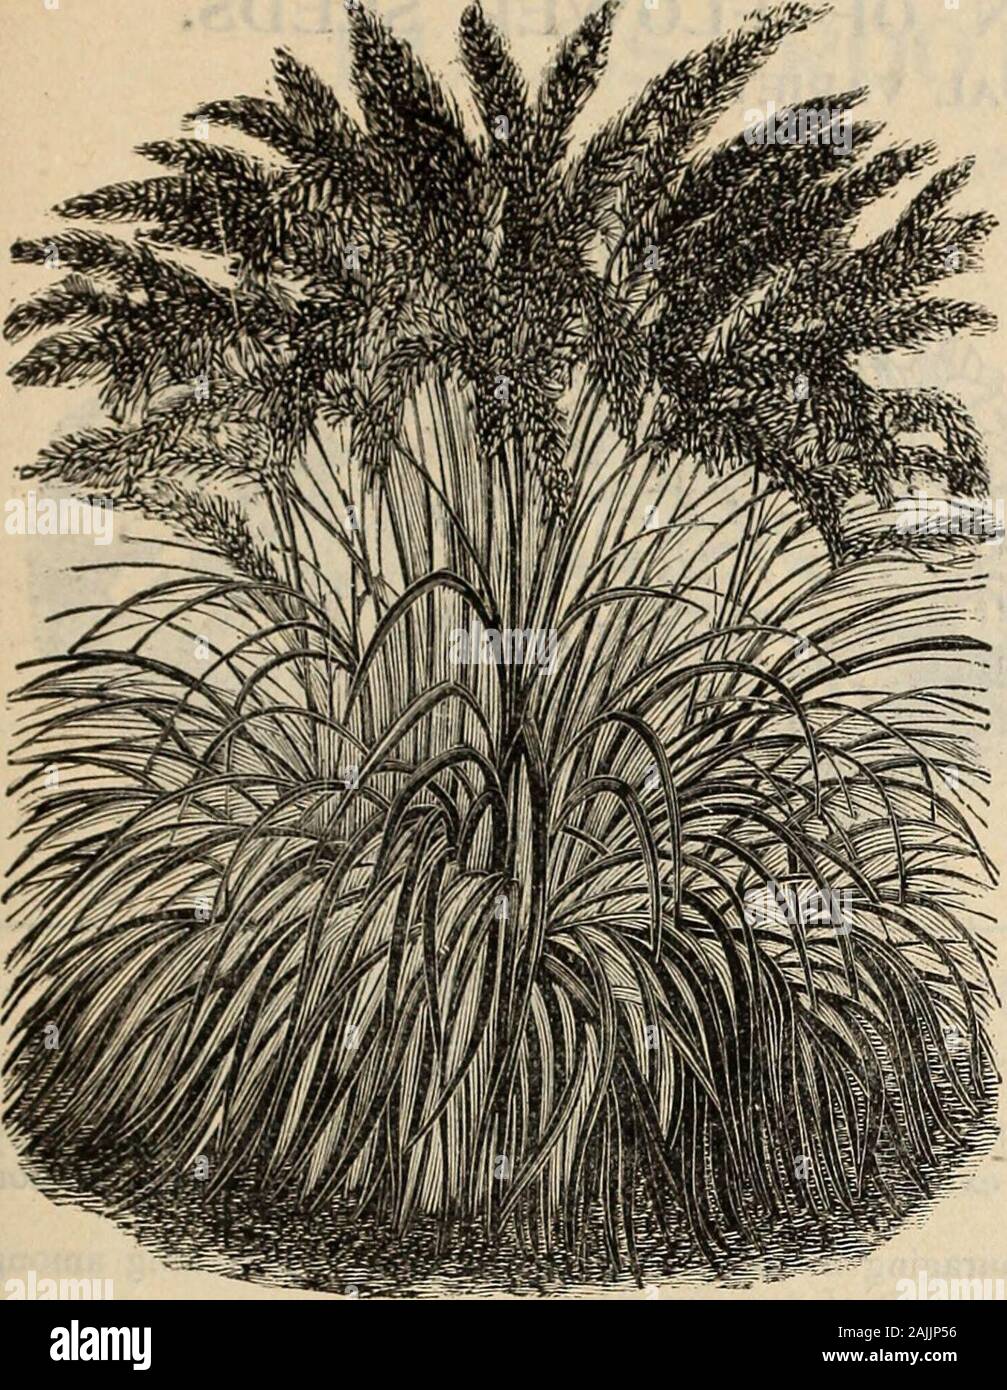 Farquhar's catalogue of seeds 1900 : plants, bulbs tools fertilizers, sundries . HORDEUM JUBATUM. R. & f. FARQUHAR & CO.S SEED CATALOGUE. 77. PENNISETUM RUPPELIANUM. No. Pkt. ORNAMENTAL GRASSES —Continued.8525 Hrodeum Jubatum; (Squirrel=Tail Grass,) Bushy panicles, excellent for bouquets, annual; height three feet • • ... .05 8530 Lagurus Ovatus. (Hares Tail Grass.) Hardyannual with downy silvery-grey tufts ; useful for driedflower work, one foot •..«....• 05 8532 Pennisetum Longistylum. An annual grass with large gracefully drooping heads, height two feet . . .05 8533 — Ruppelianum. This new Stock Photo